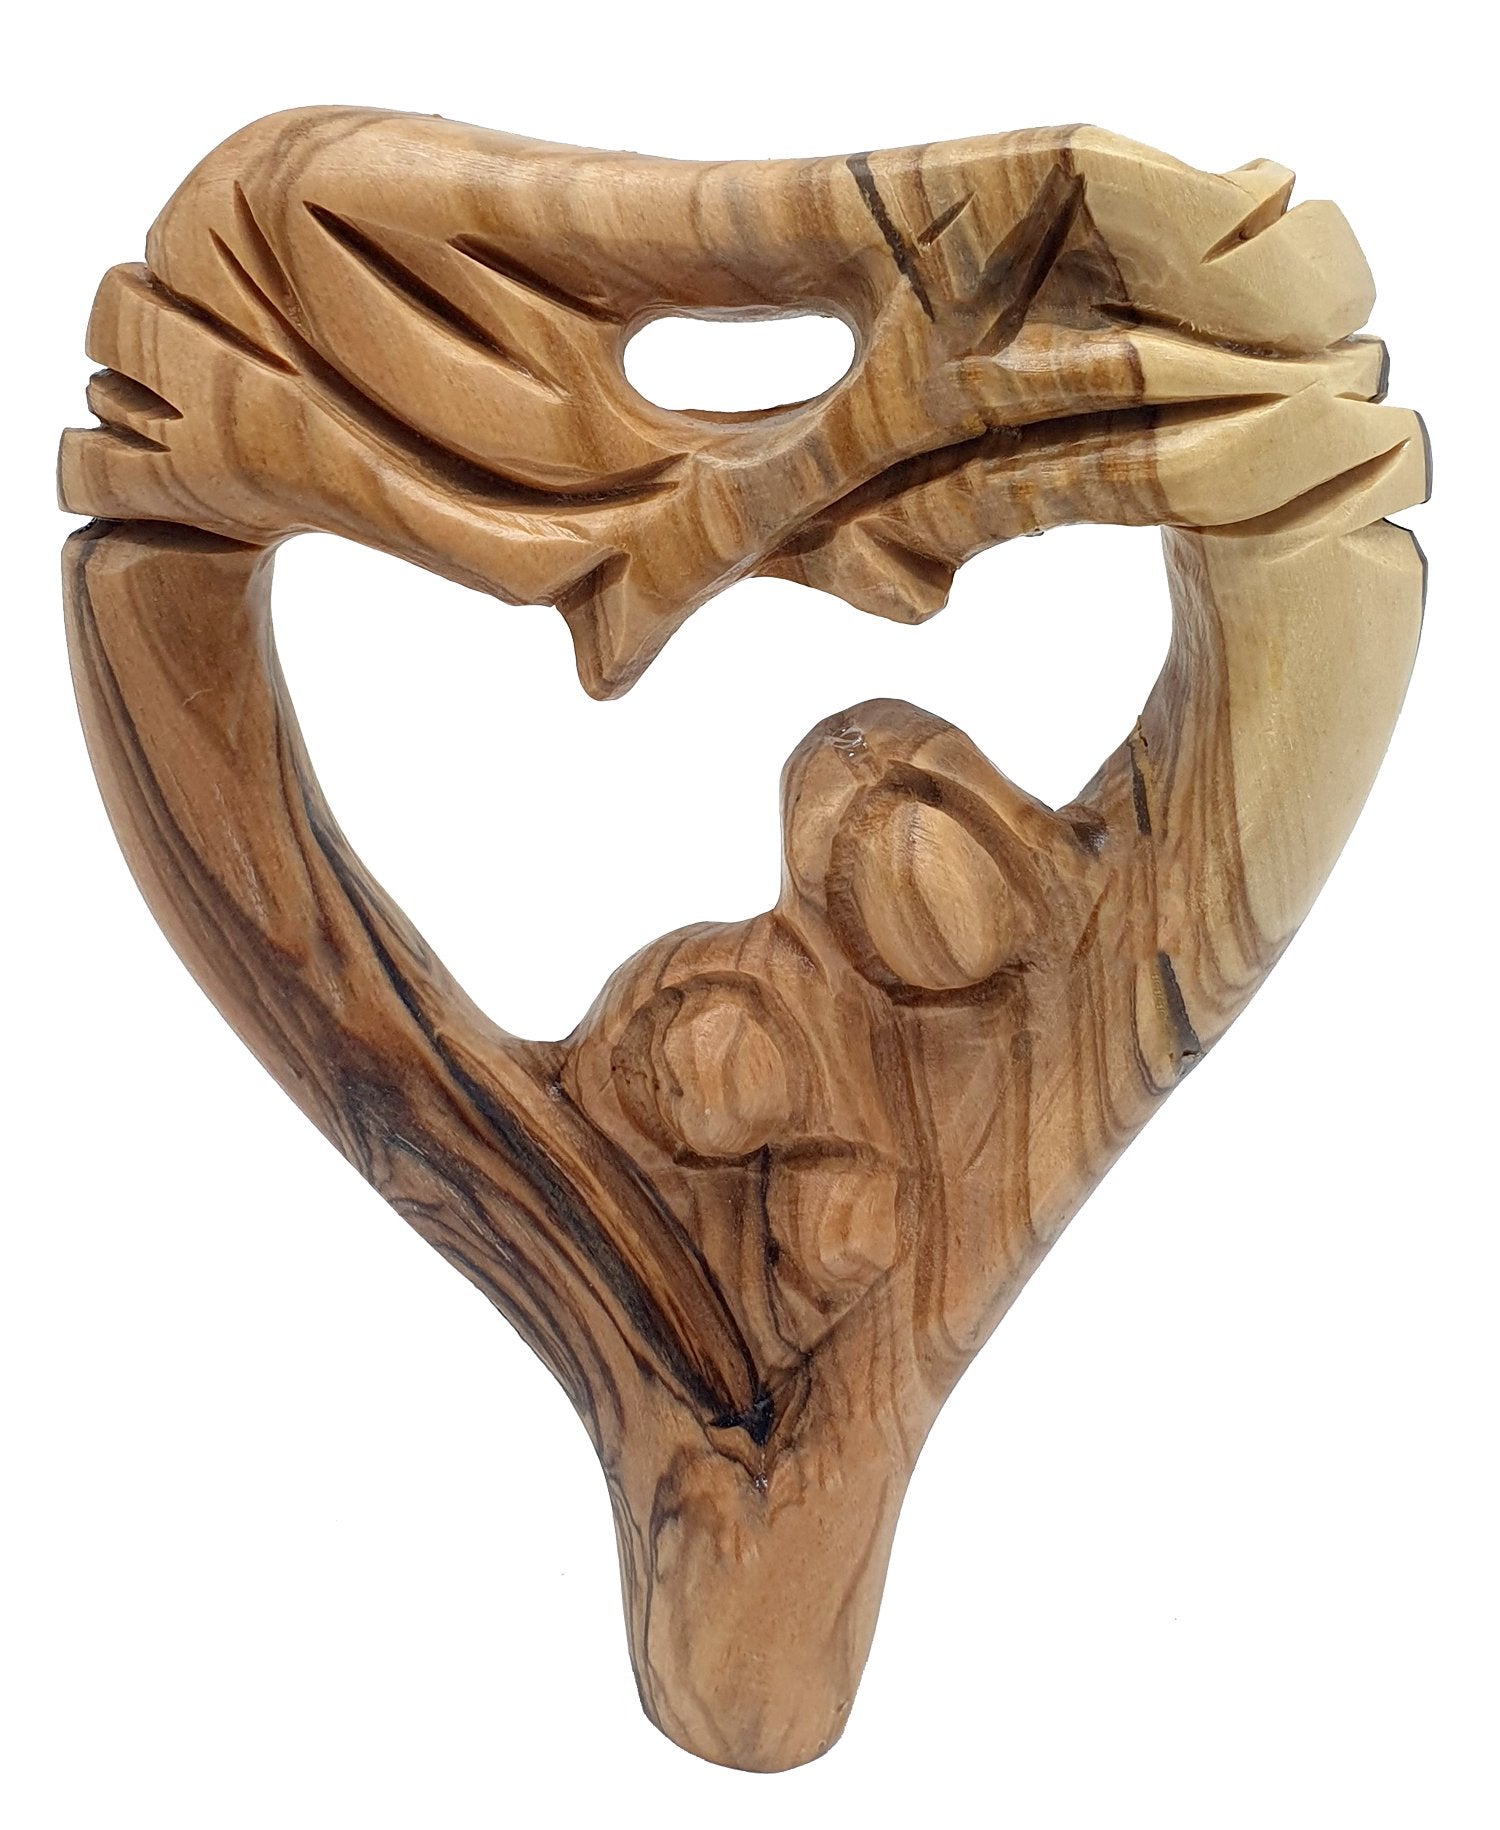 Heart Shaped Olive Wood Holy Family Statue - Small Catholic Figurine of Joseph, Mother & Child, Bethlehem Table Sculpture - Zuluf